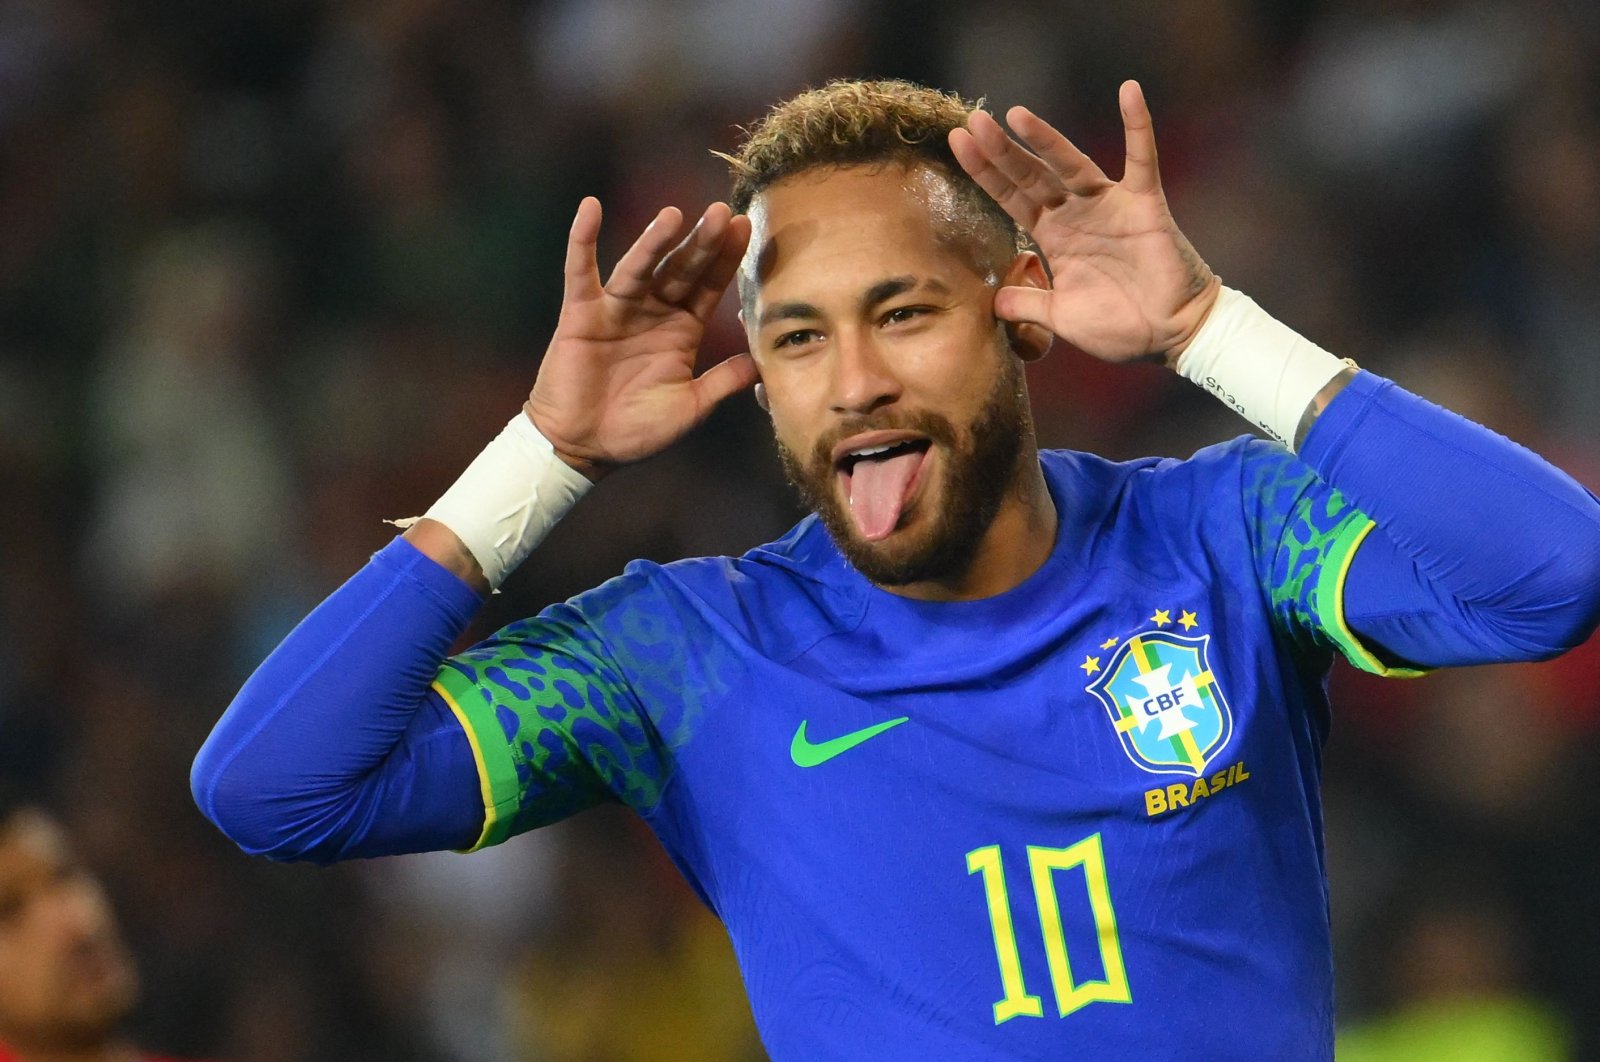 Brazil&#039;s forward Neymar celebrates scoring his team&#039;s third goal during the friendly football match between Brazil and Tunisia at the Parc des Princes, Paris, France, Sept. 27, 2022. (AFP Photo)